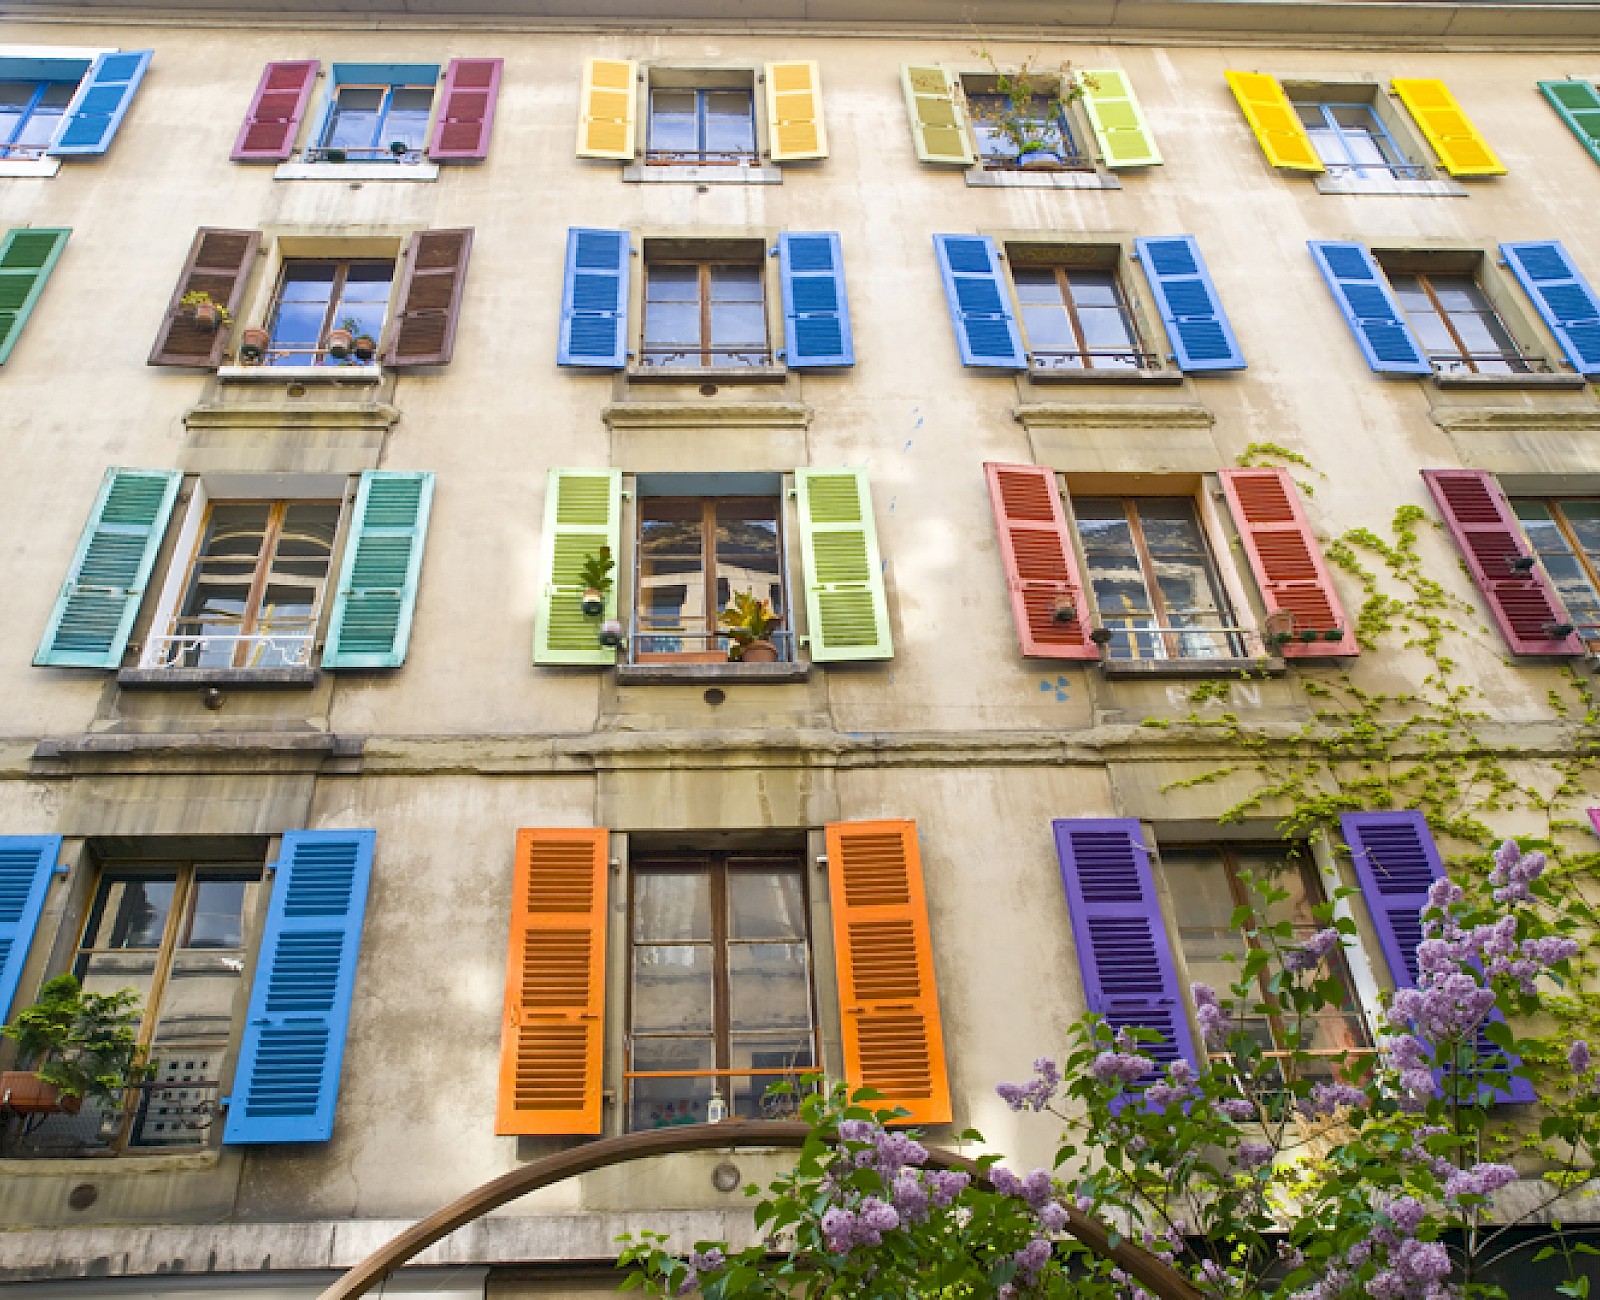 Colorful windows with wooden shutters